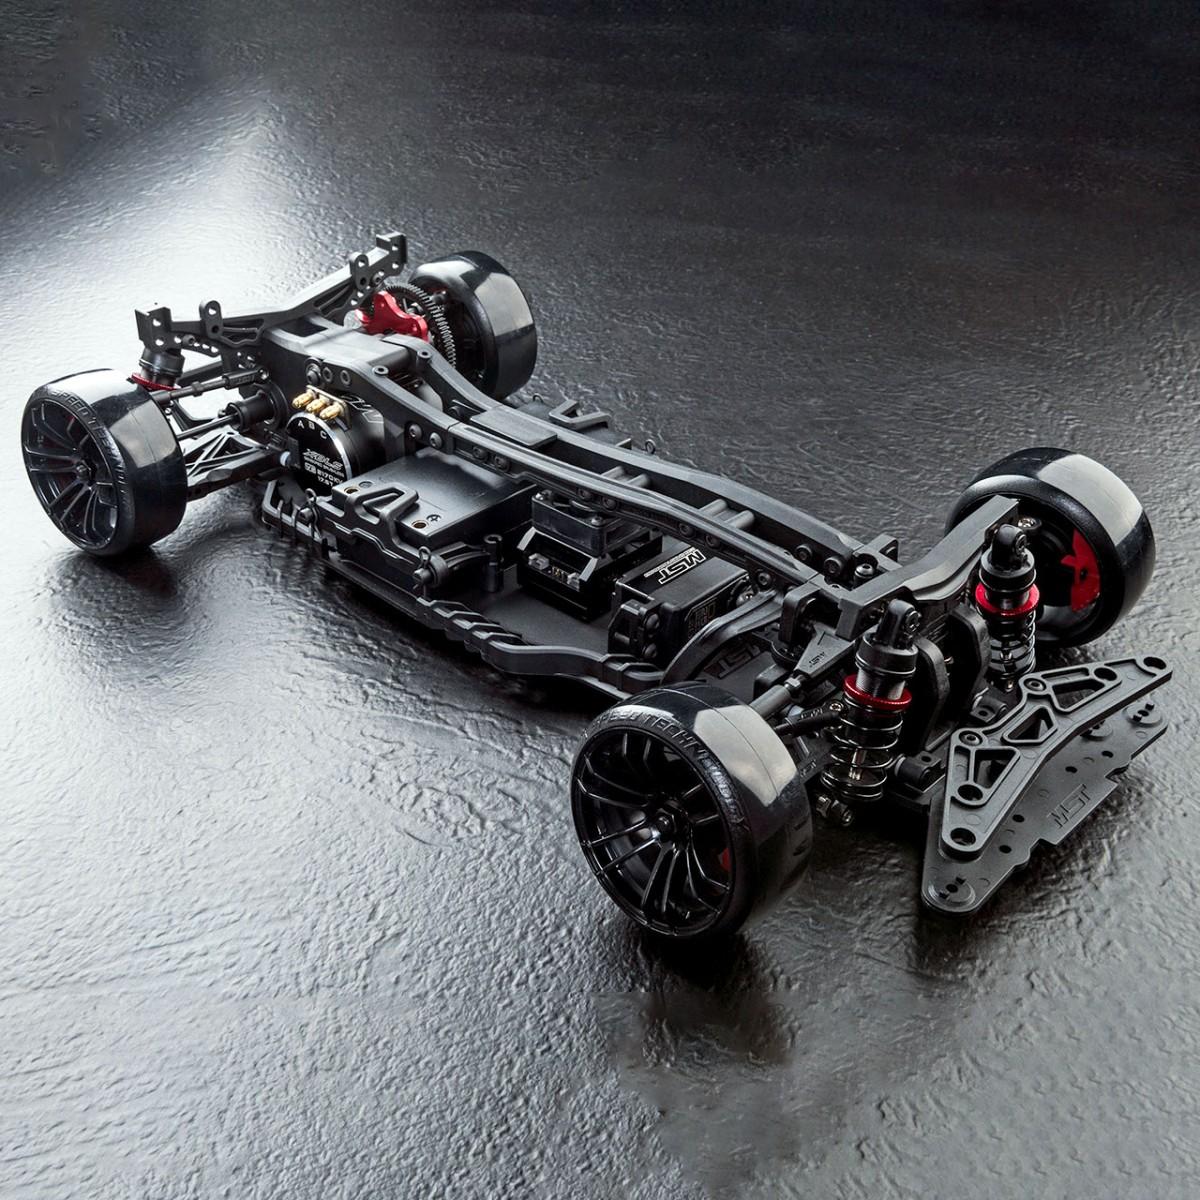 Mst Rc Cars: MST RC Cars at a Glance